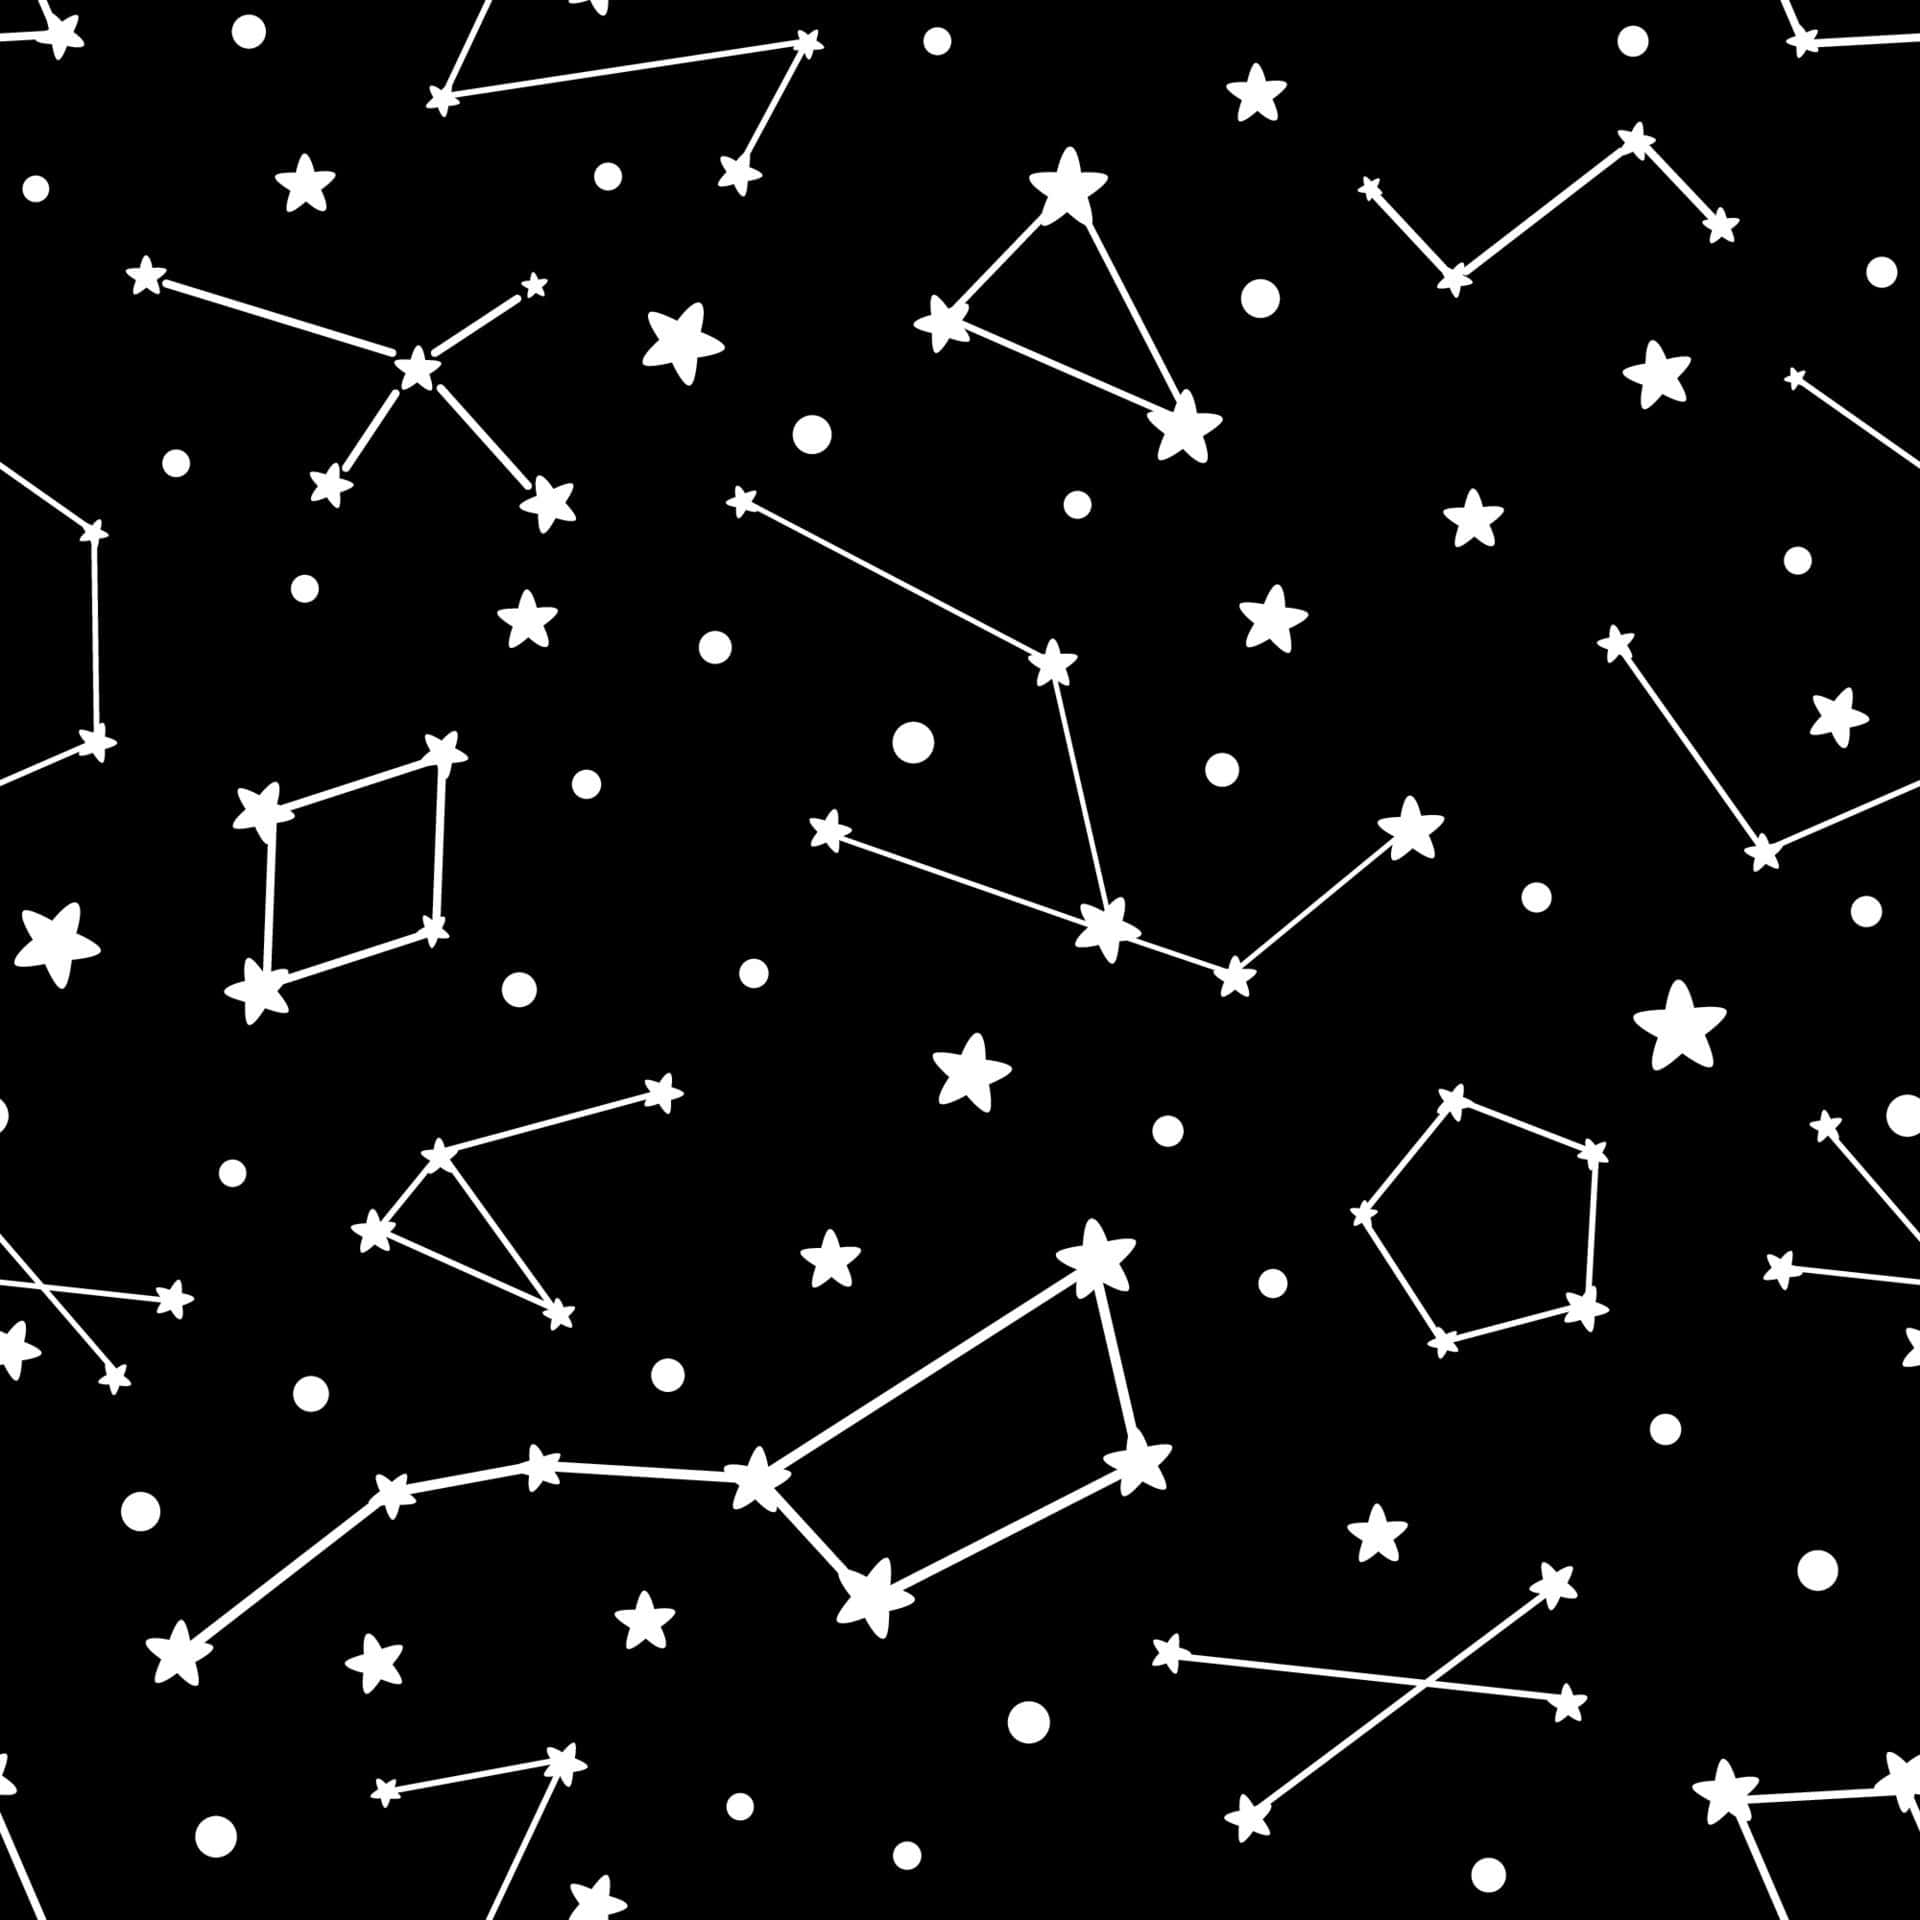 Stunning Night Sky Filled with Constellations Wallpaper